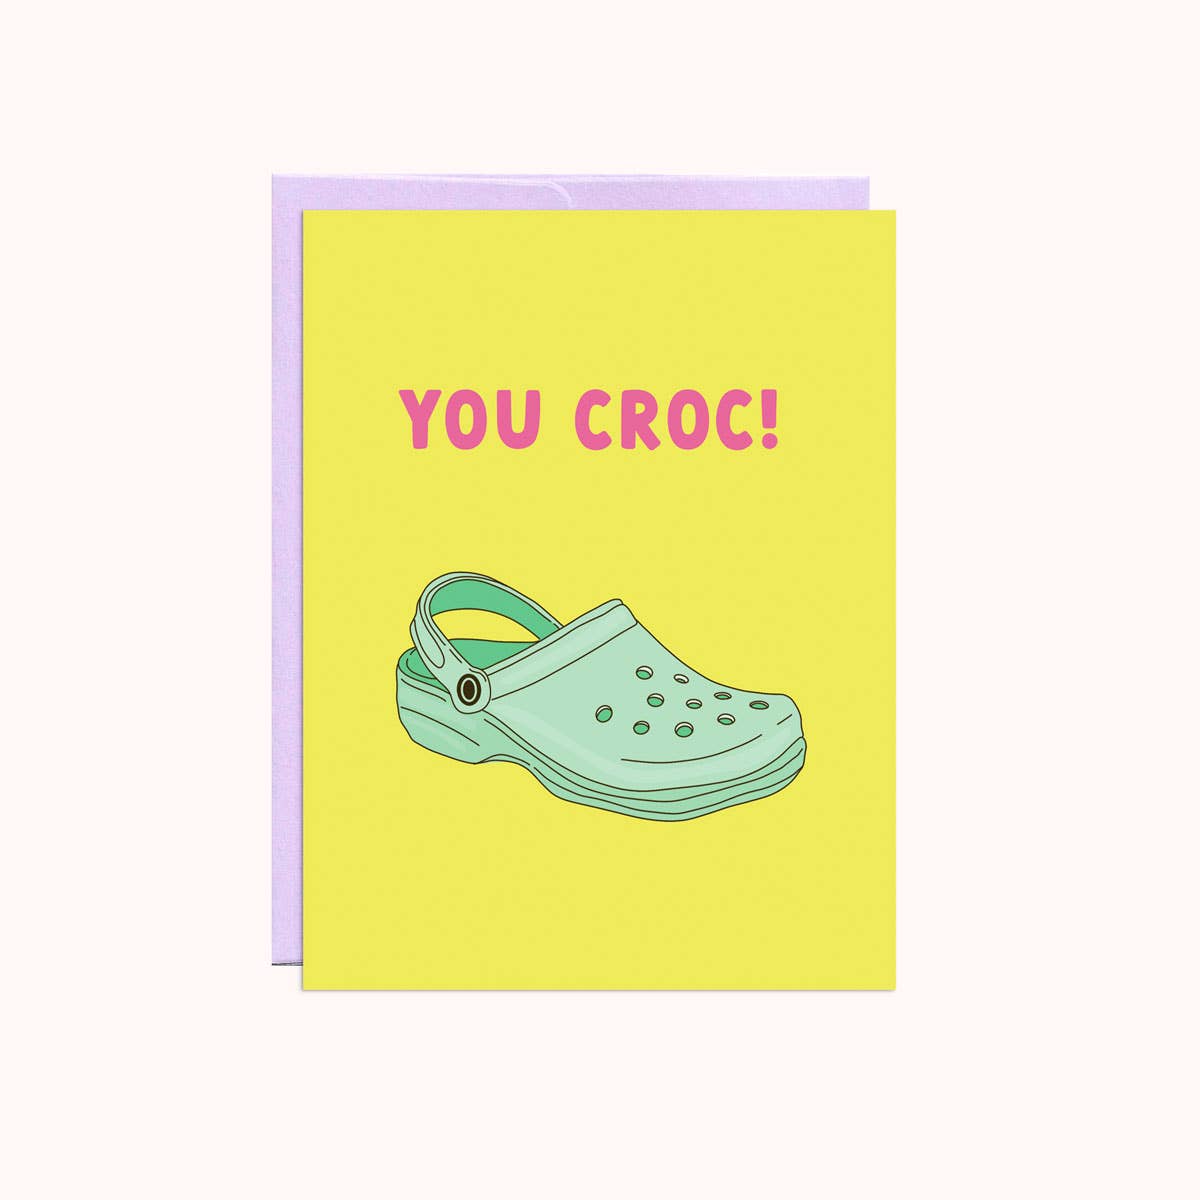 Party Mountain Paper Co. | You Croc Greeting Card, The Local Space, Local Canadian Brands